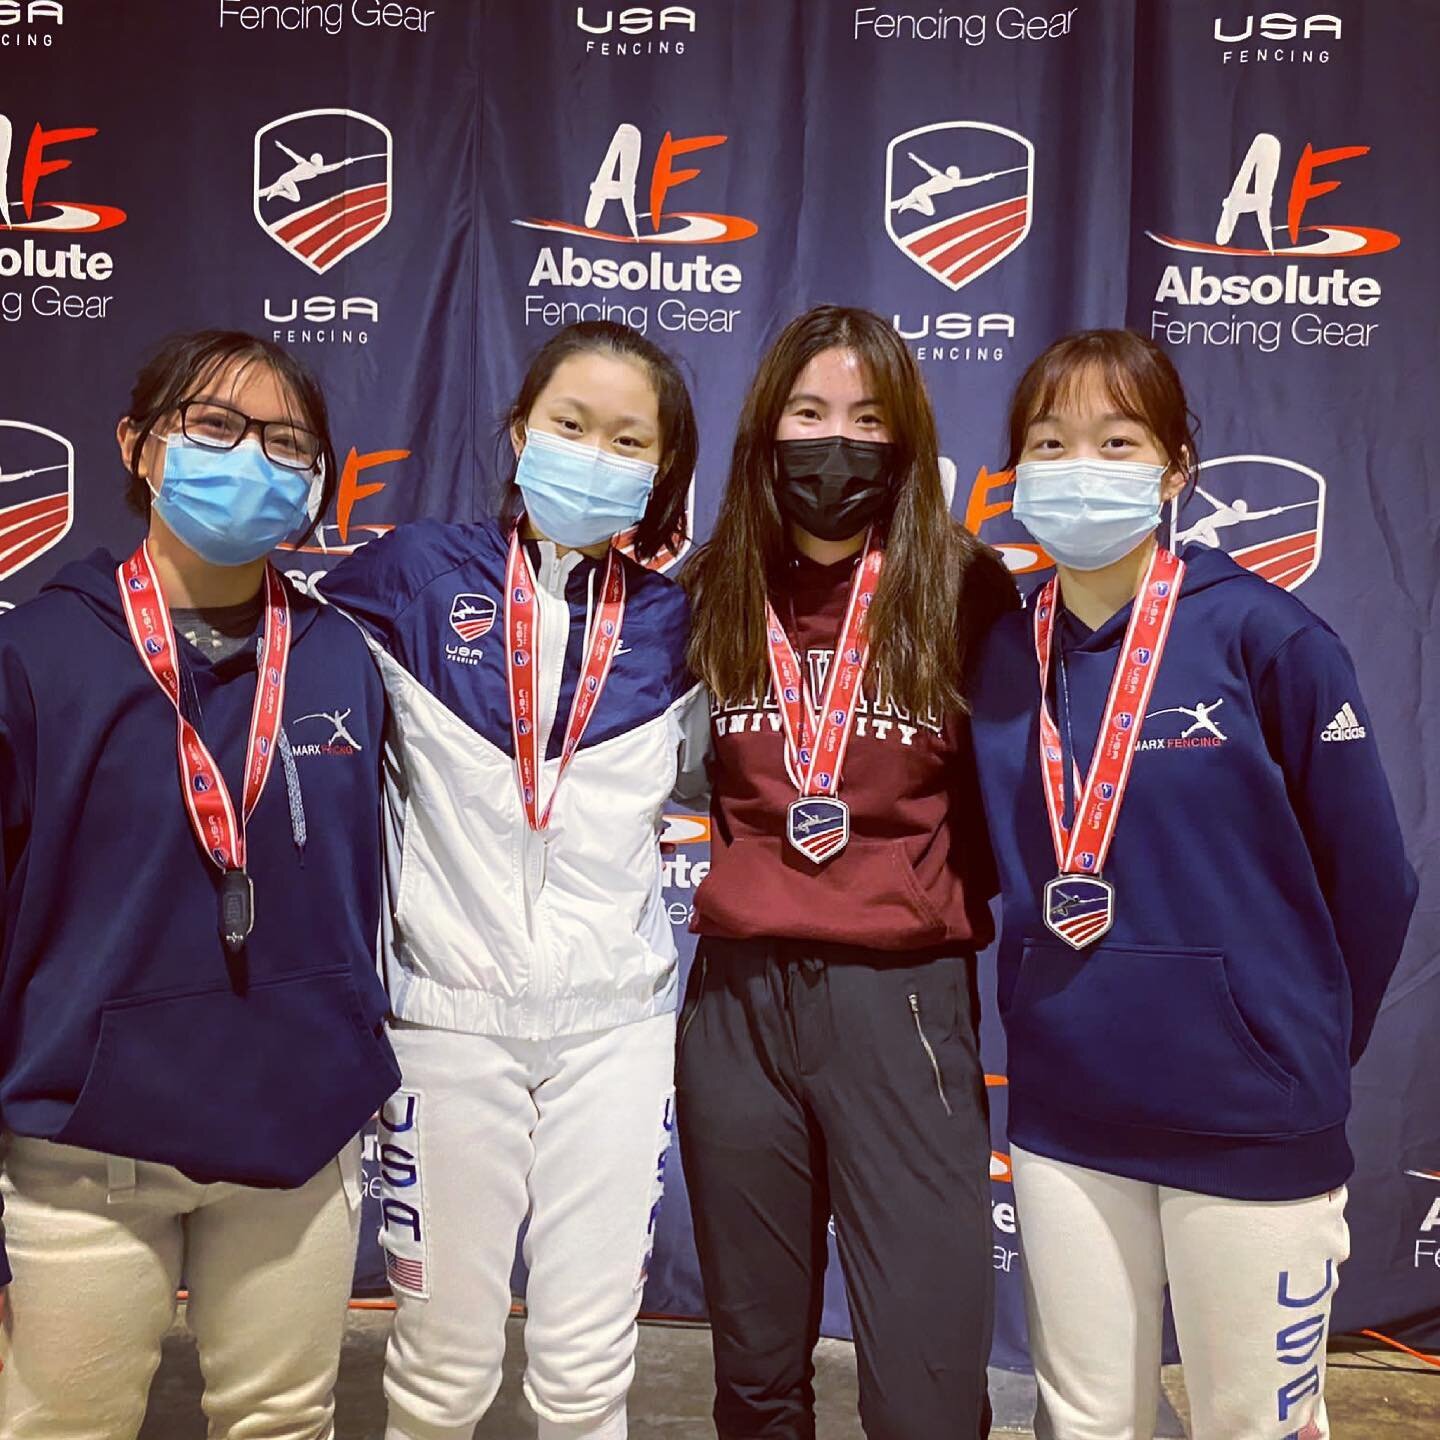 Silver medals for our women&rsquo;s foil team today - again can&rsquo;t say how proud we are of all of our athletes. Congratulations. #marxfencingacademy #acenterforexcellence #usfencing#summernationals2021